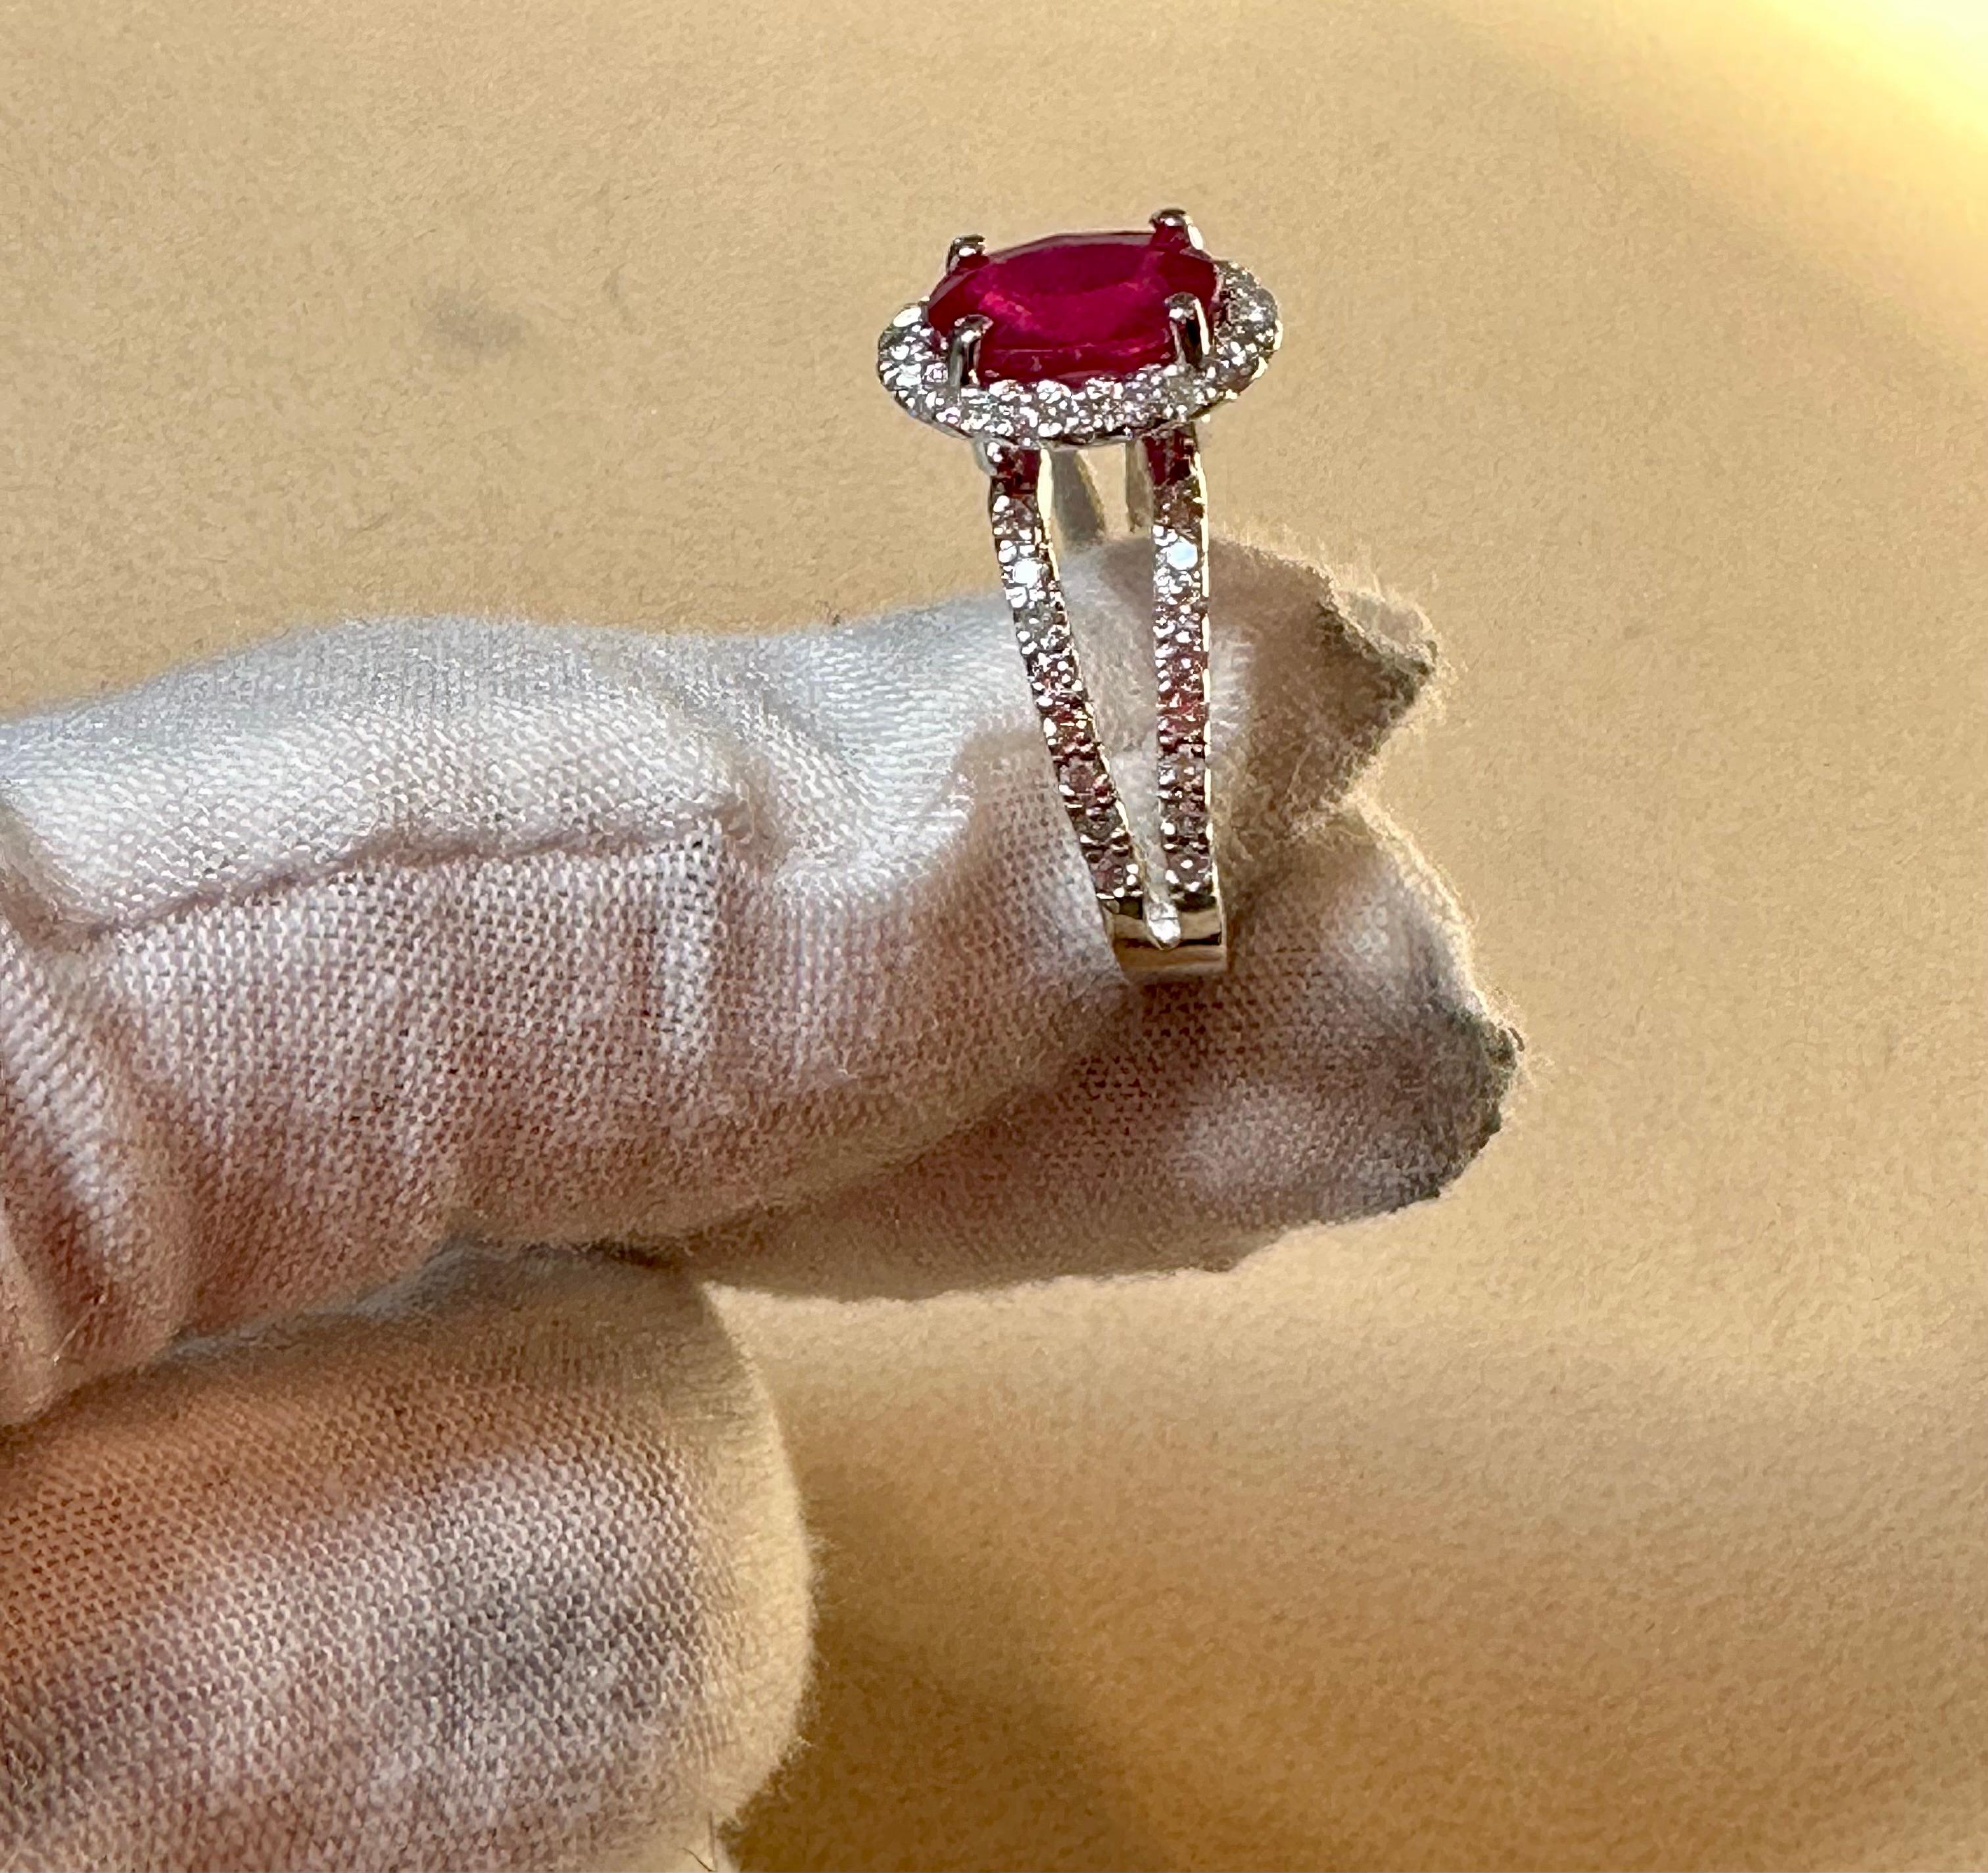 2.5 Carat Oval Treated Ruby & 2 ct Diamond Ring 14 Karat White Gold Size 7.25 For Sale 3